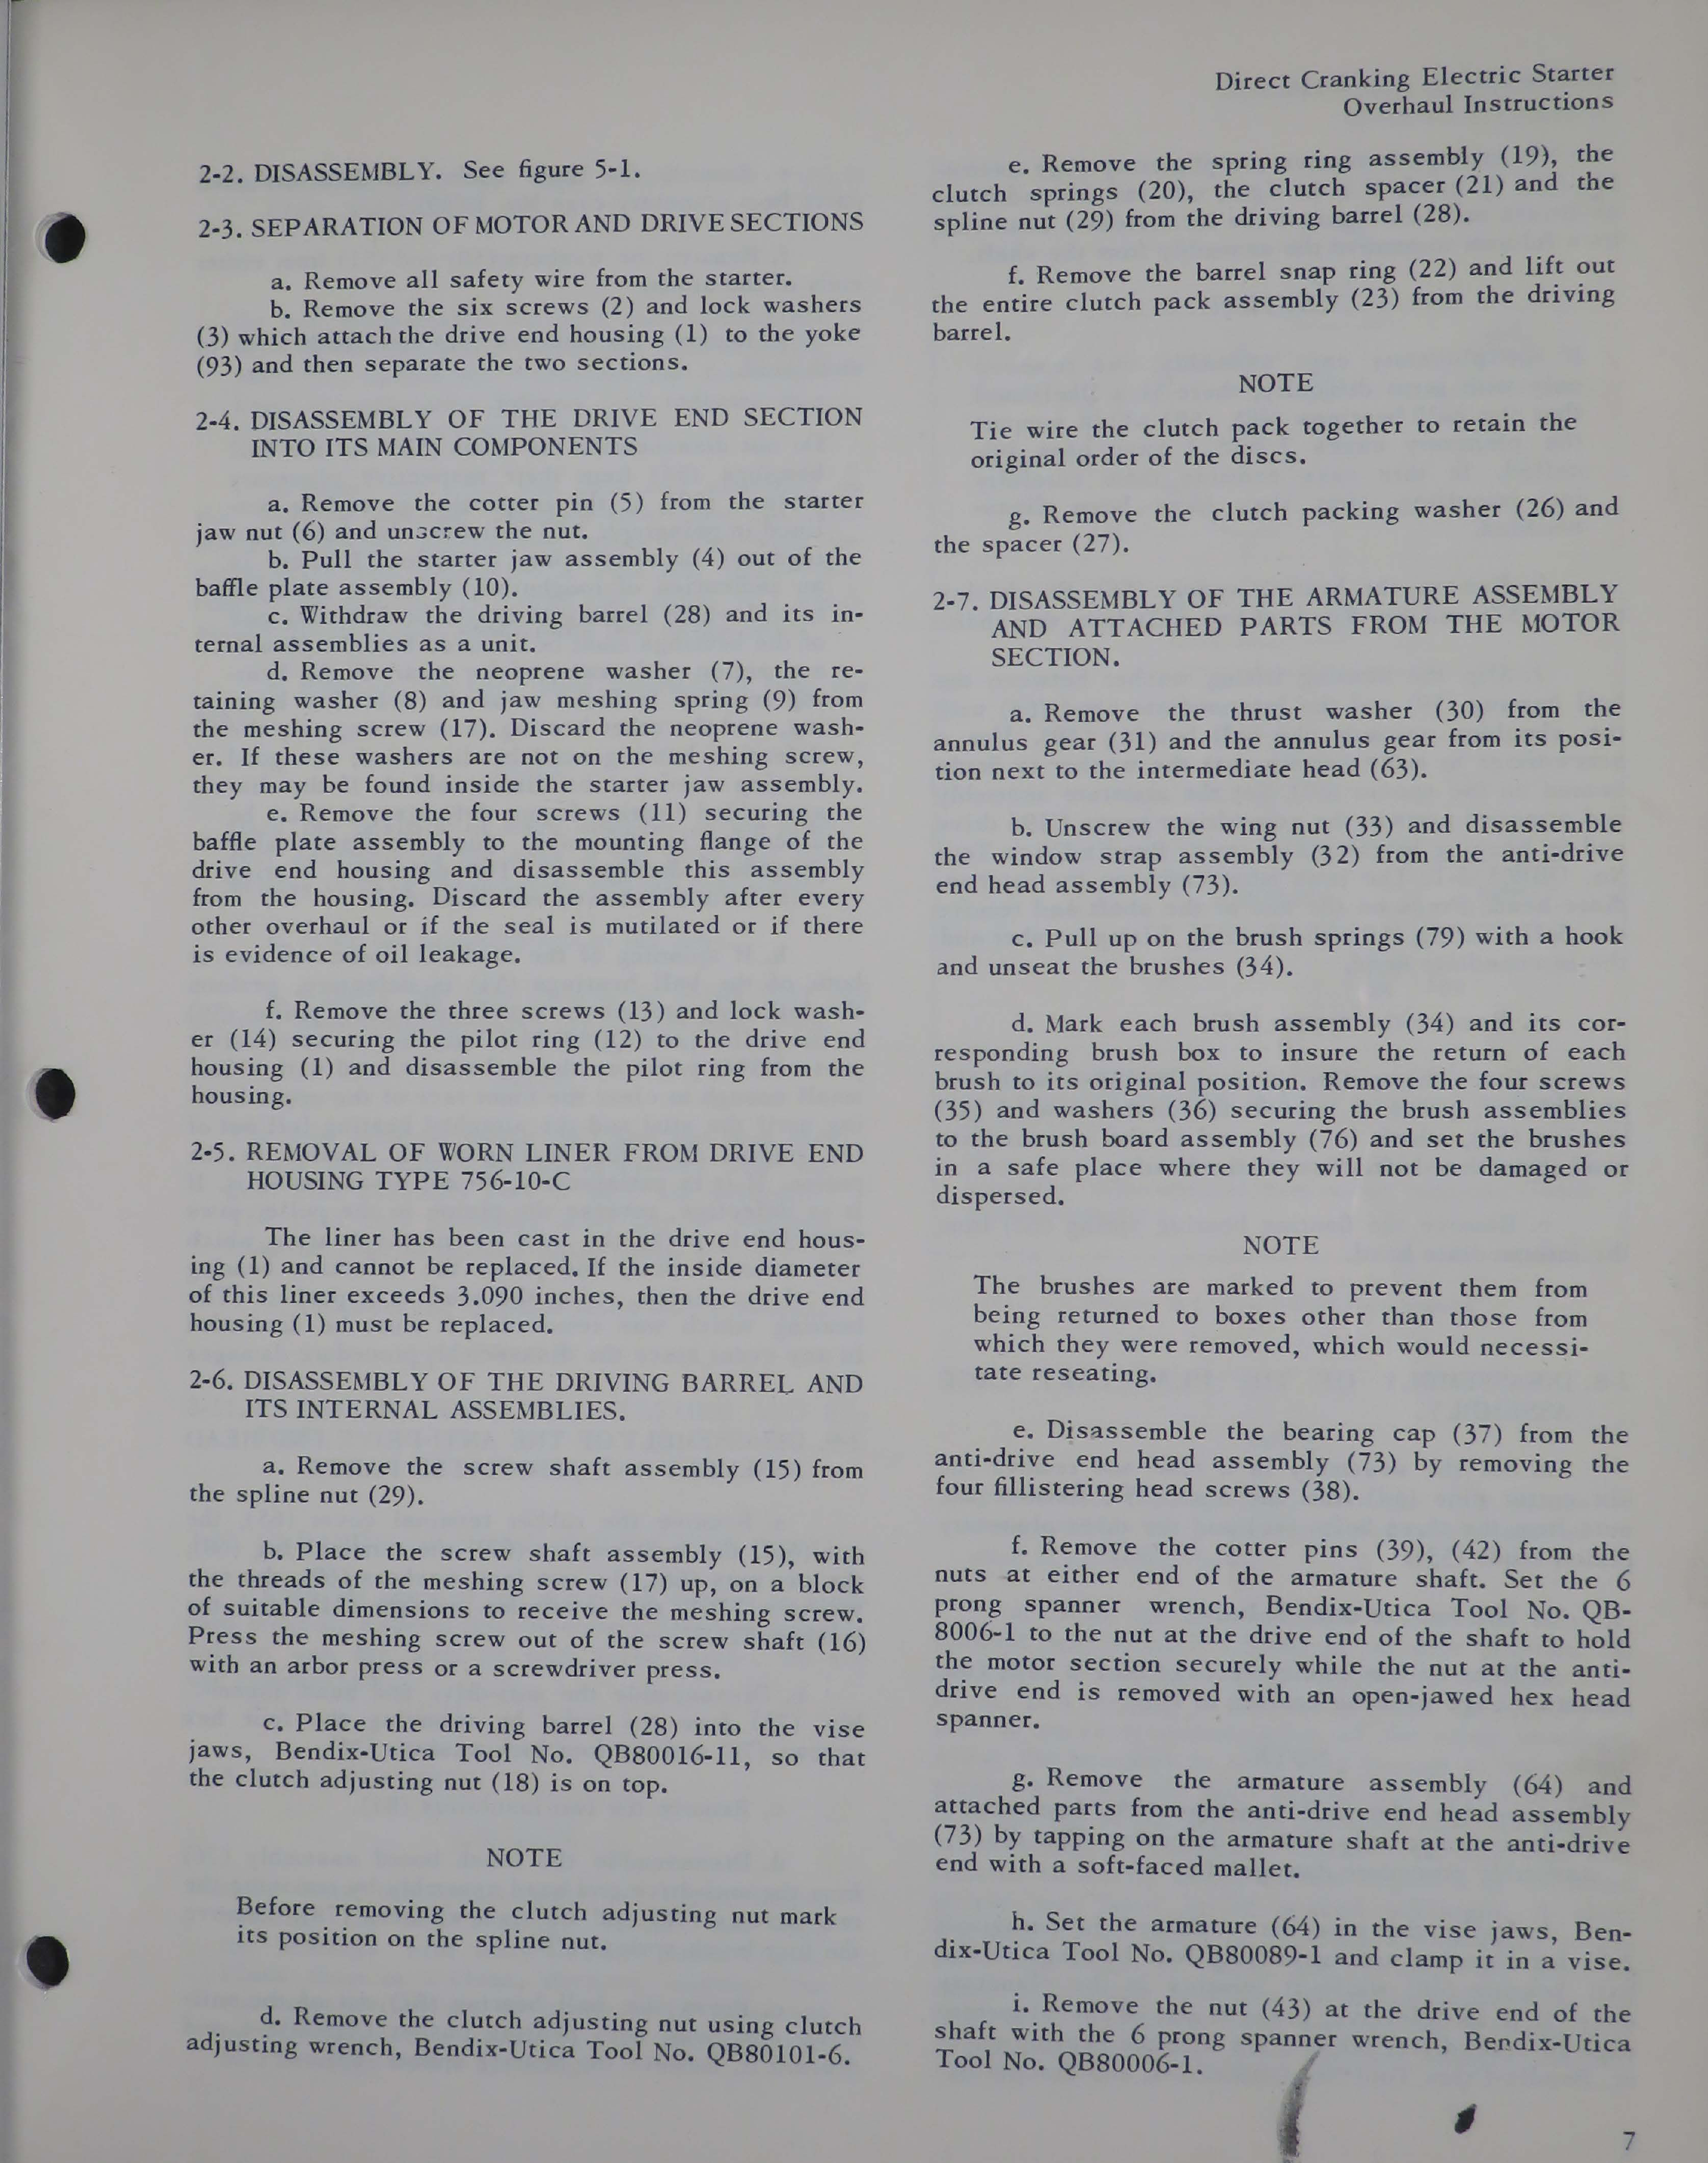 Sample page 7 from AirCorps Library document: Overhaul Instructions with Parts for Direct Cranking Electric Starter - Type 756-10-C 